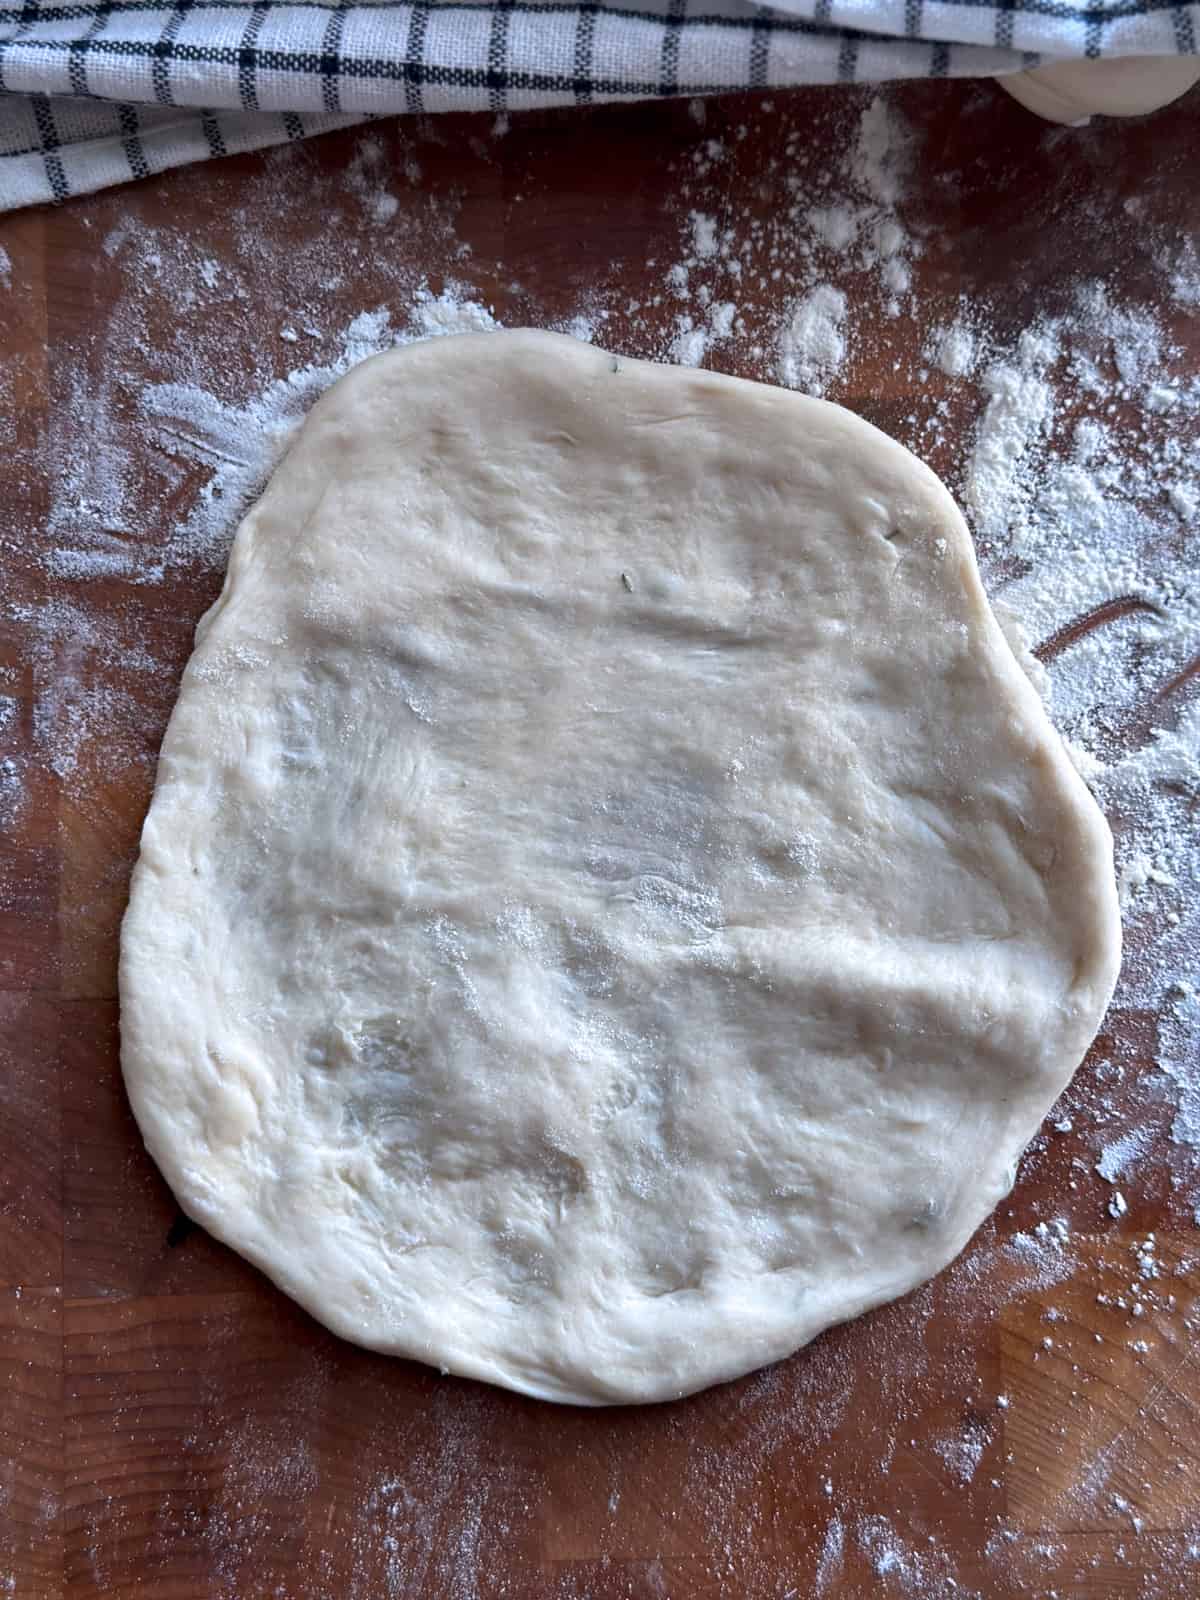 A stretched pita on a floured surface.